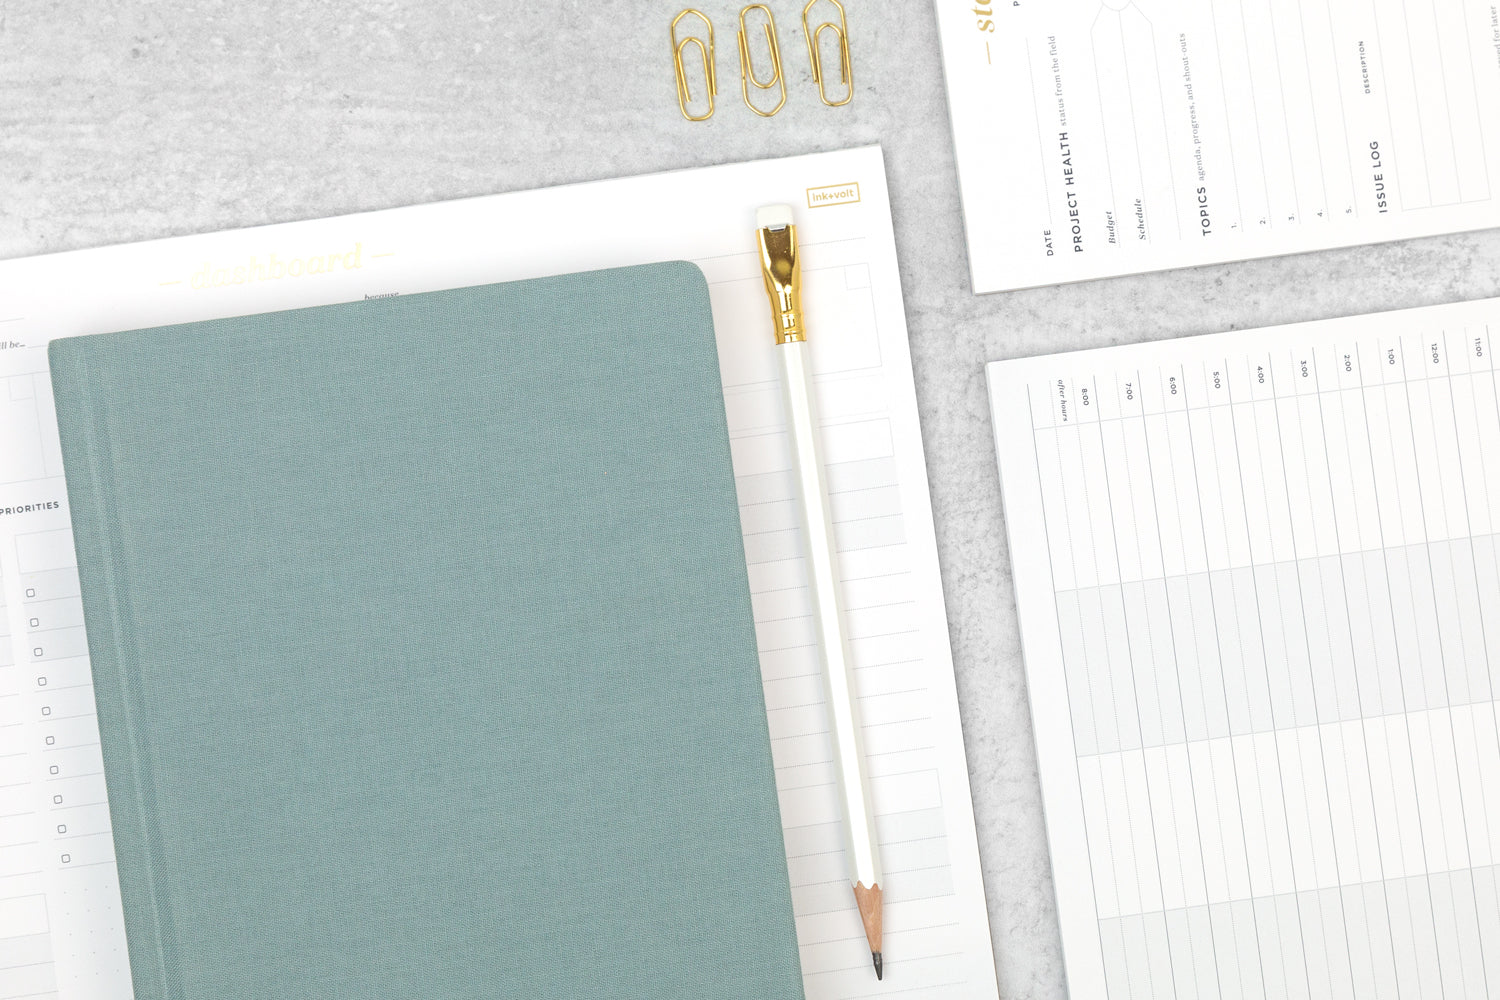 An array of white, gold, light blue planning tools and notepads on a grey desktop.